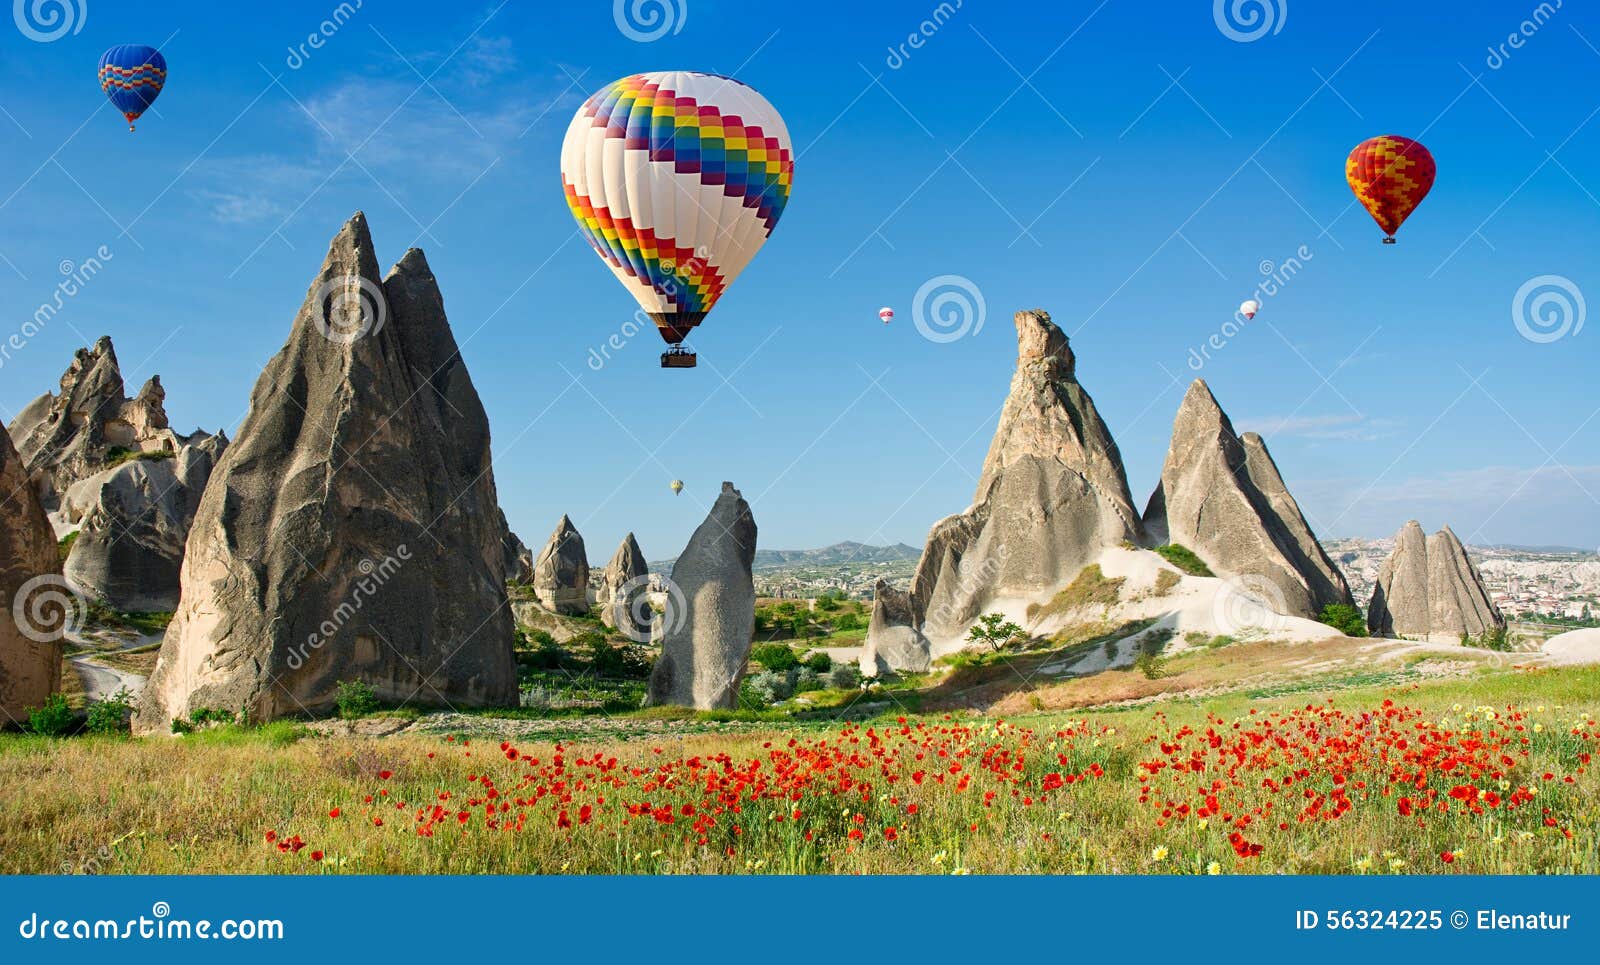 hot air balloons flying over a field of poppies, cappadocia, turkey